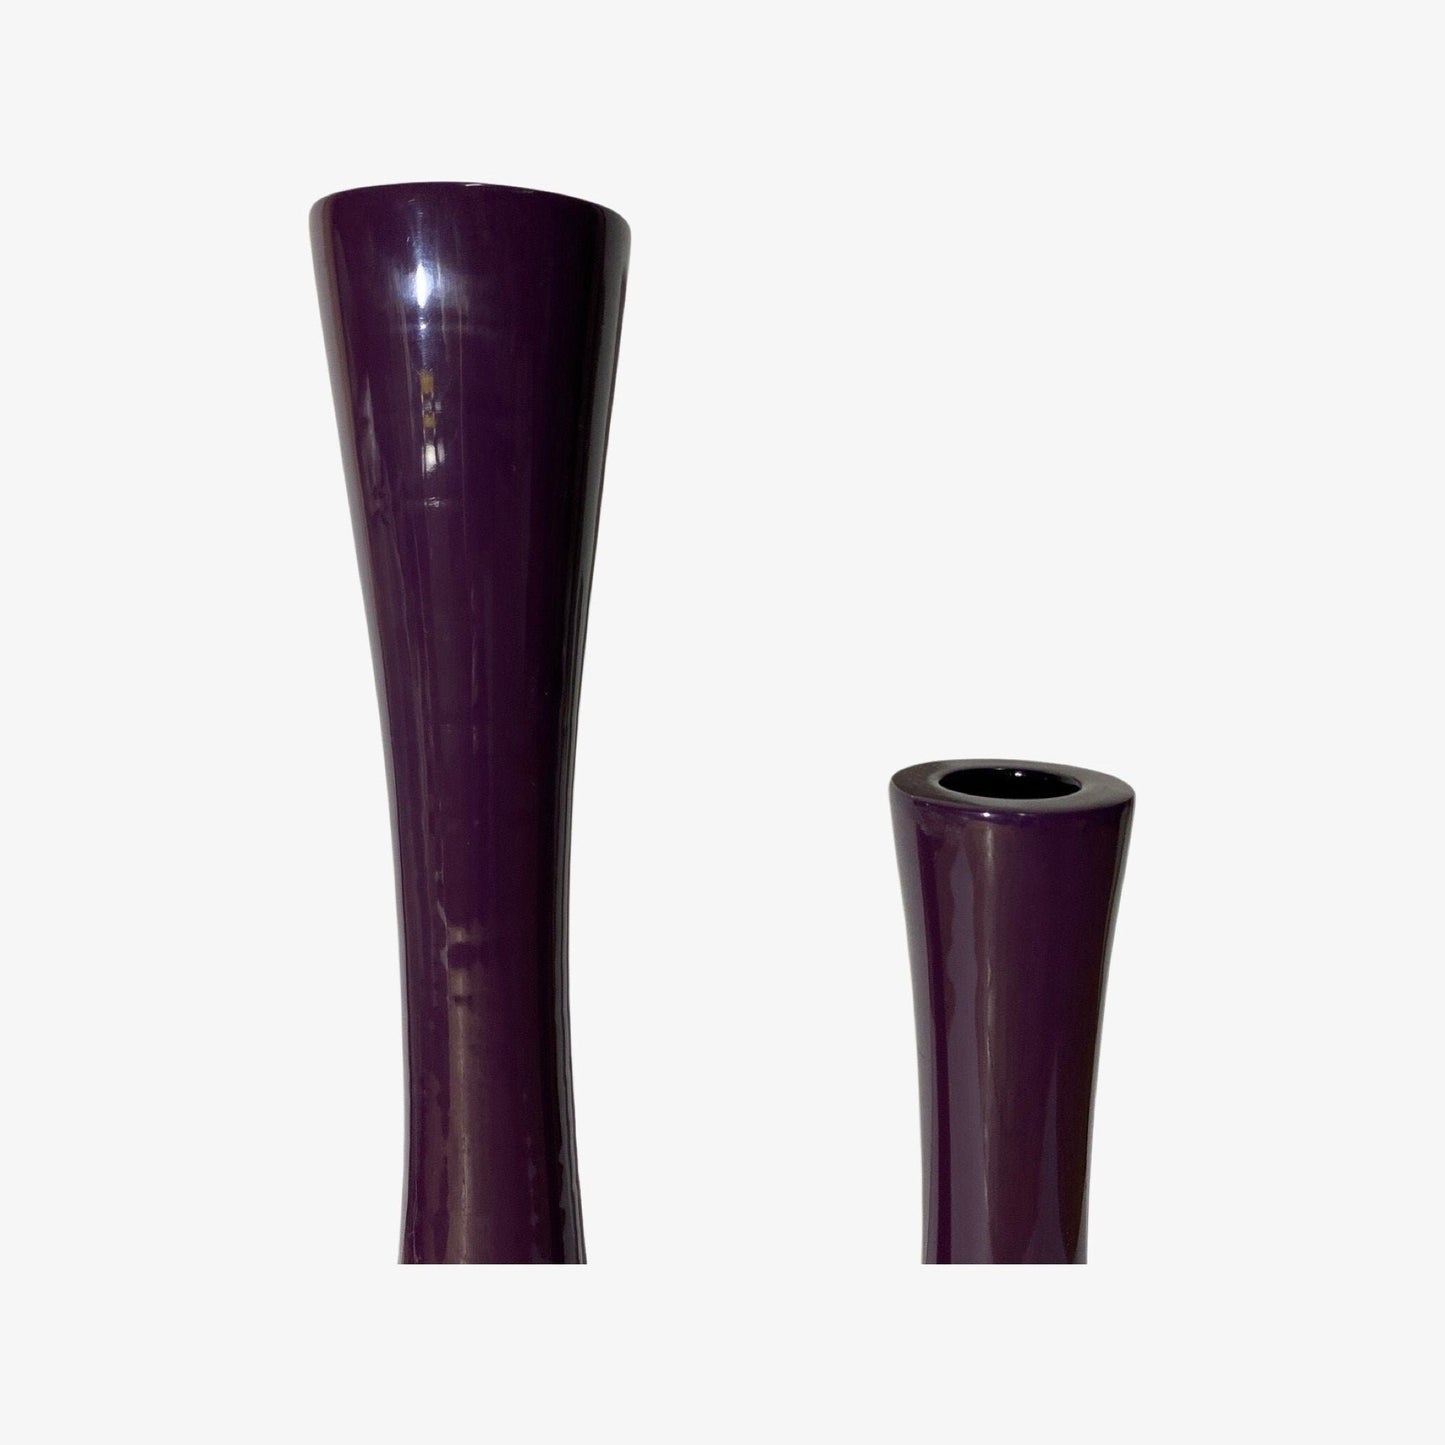 2 Purple Vintage Candlestick Holders Made From Ceramic - Mid-Century Design From Denmark | Retro Candle Holder | Height 13.8'' / 35cm